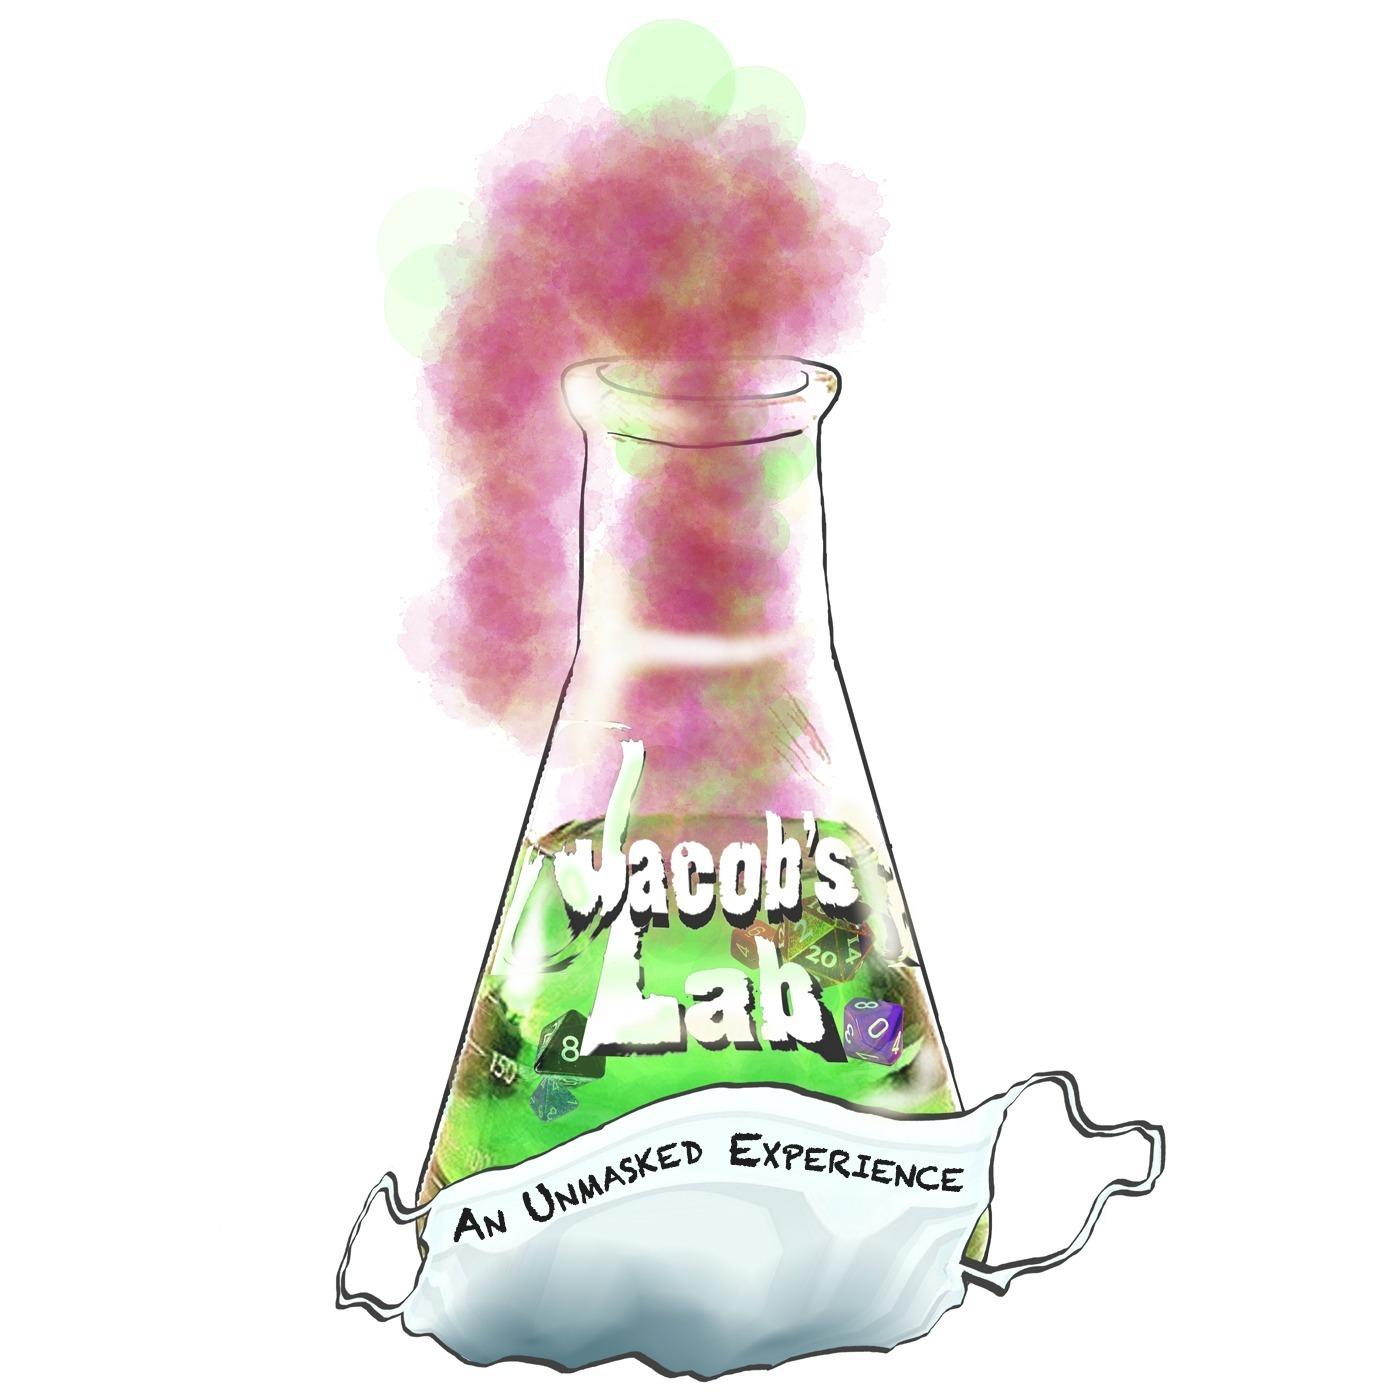 Jacob's Laboratory: An Unmasked Experience